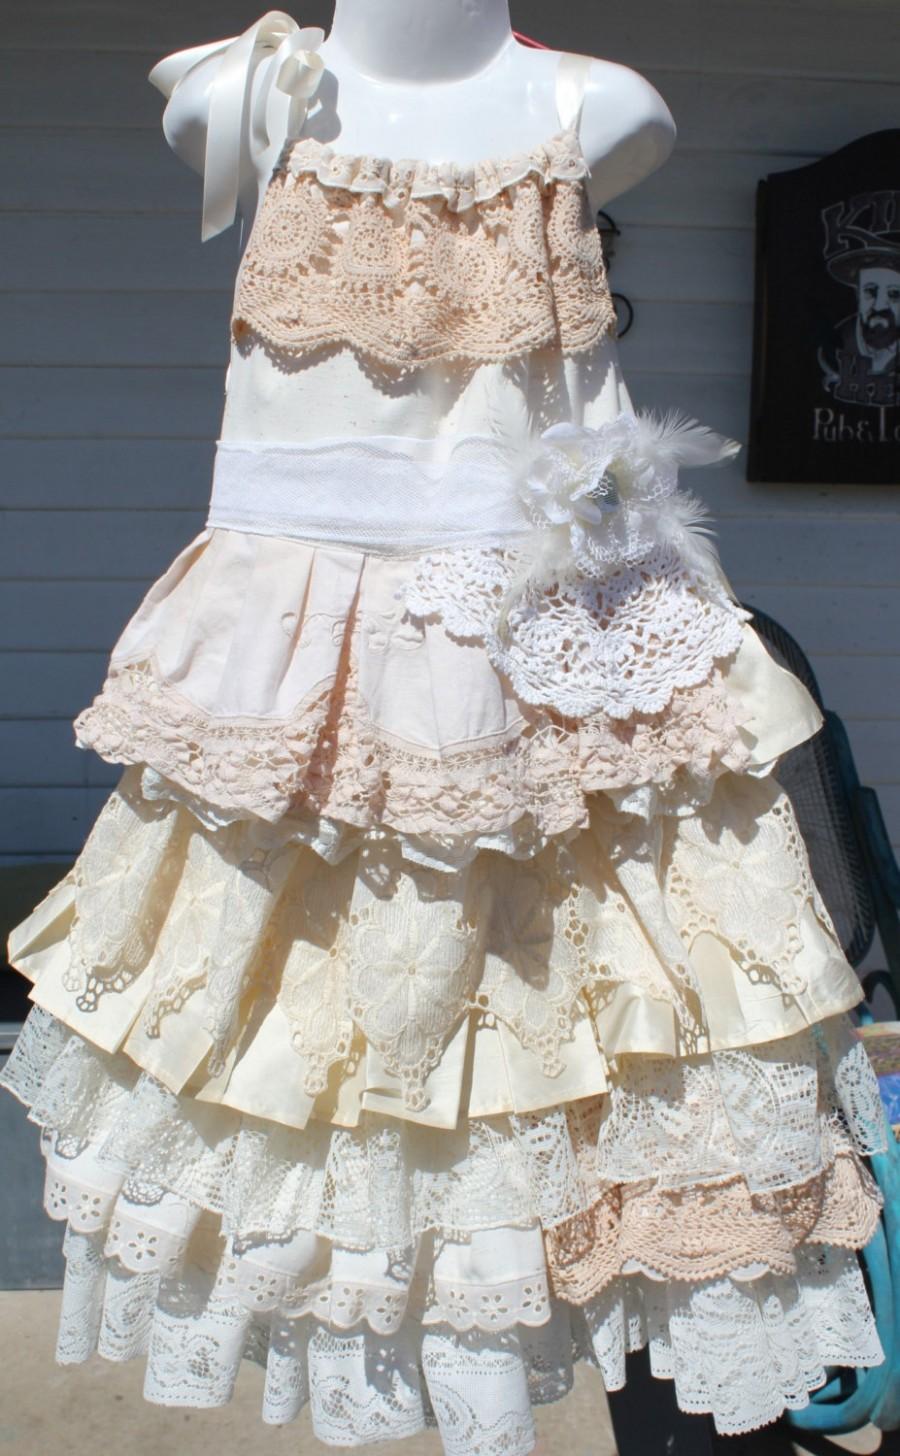 Mariage - boho, rustic,wedding, flower girl dress, size 5, 6 and 7, vintage layers ruffles,ribbon tie shoulders,cream, ivory, silk,lace,cotton,calico